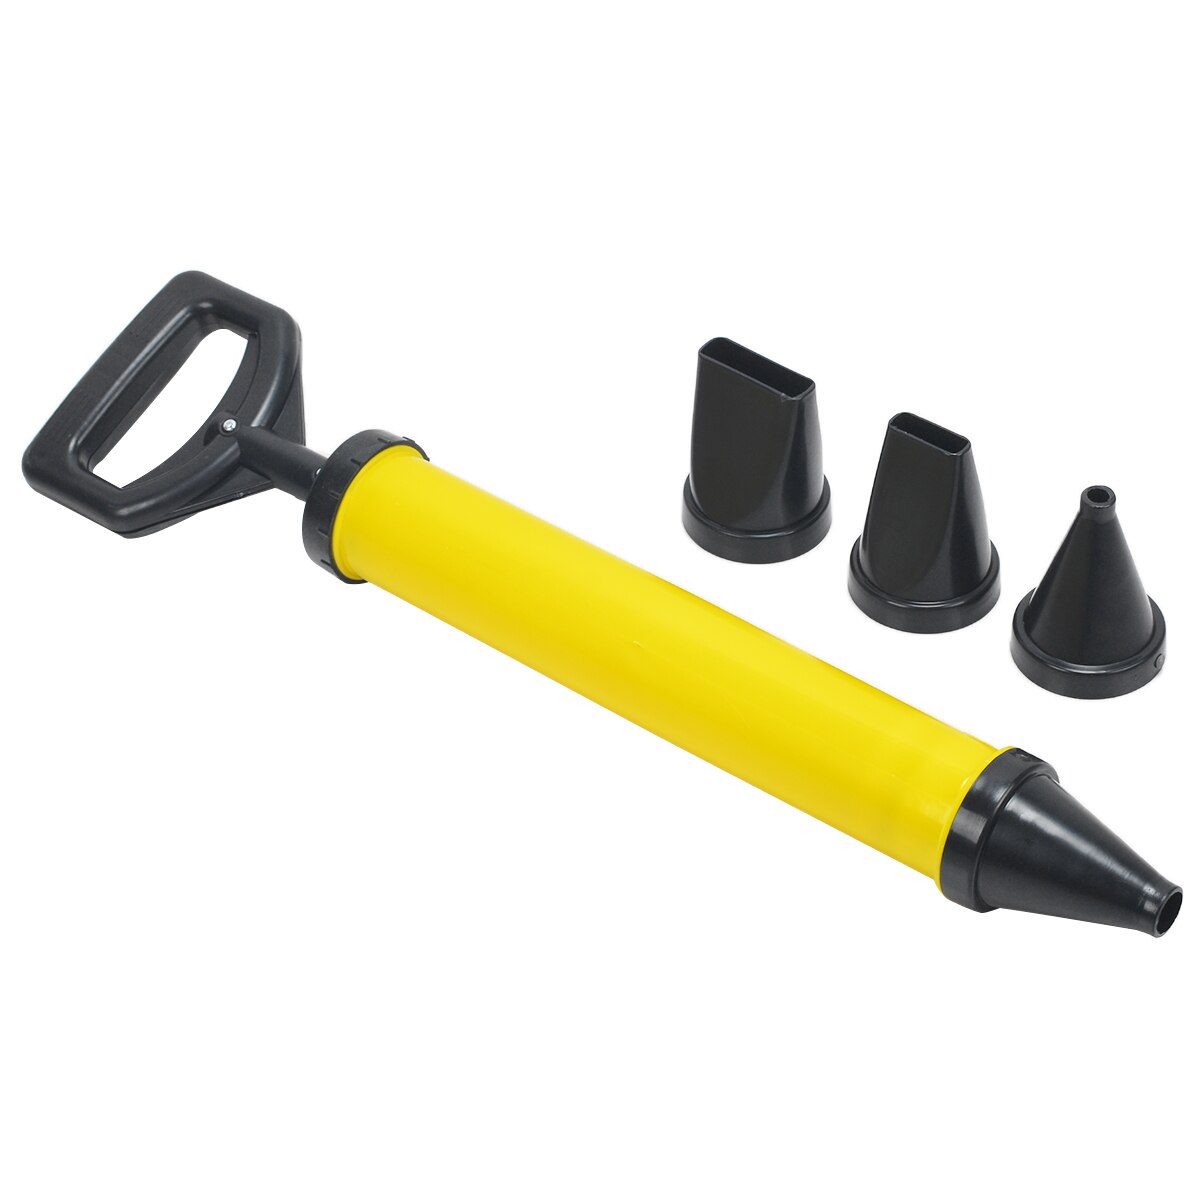 Pointing Brick Grouting Mortar Sprayer Gun Applicator Tool + 4 Nozzles for Cement Lime Grout Filling Guns Mayitr